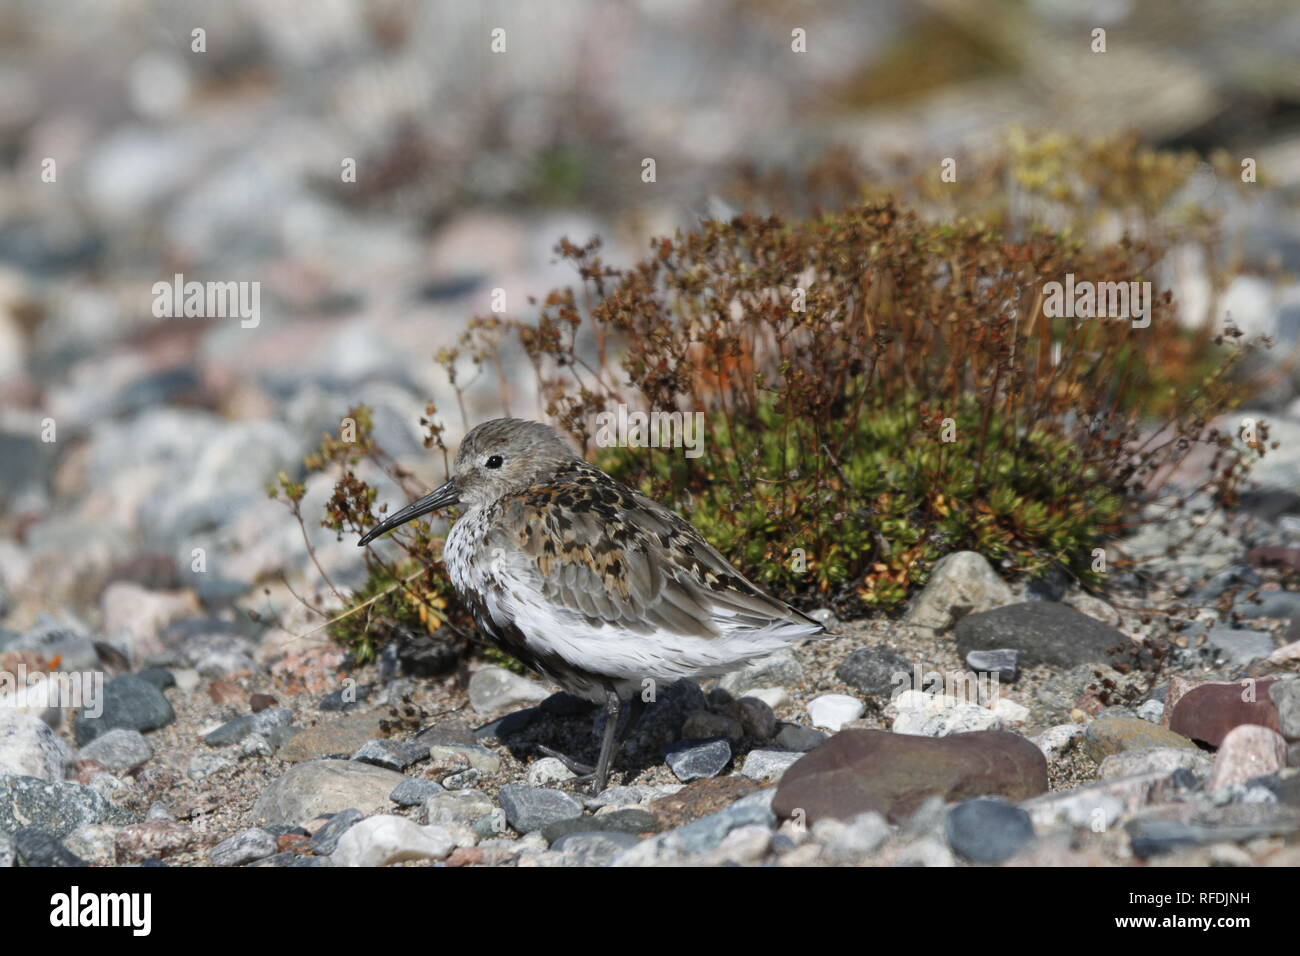 Dunlin (Calidris alpina), a medium sized sandpiper and shorebird standing sidewise with plants in the background Stock Photo